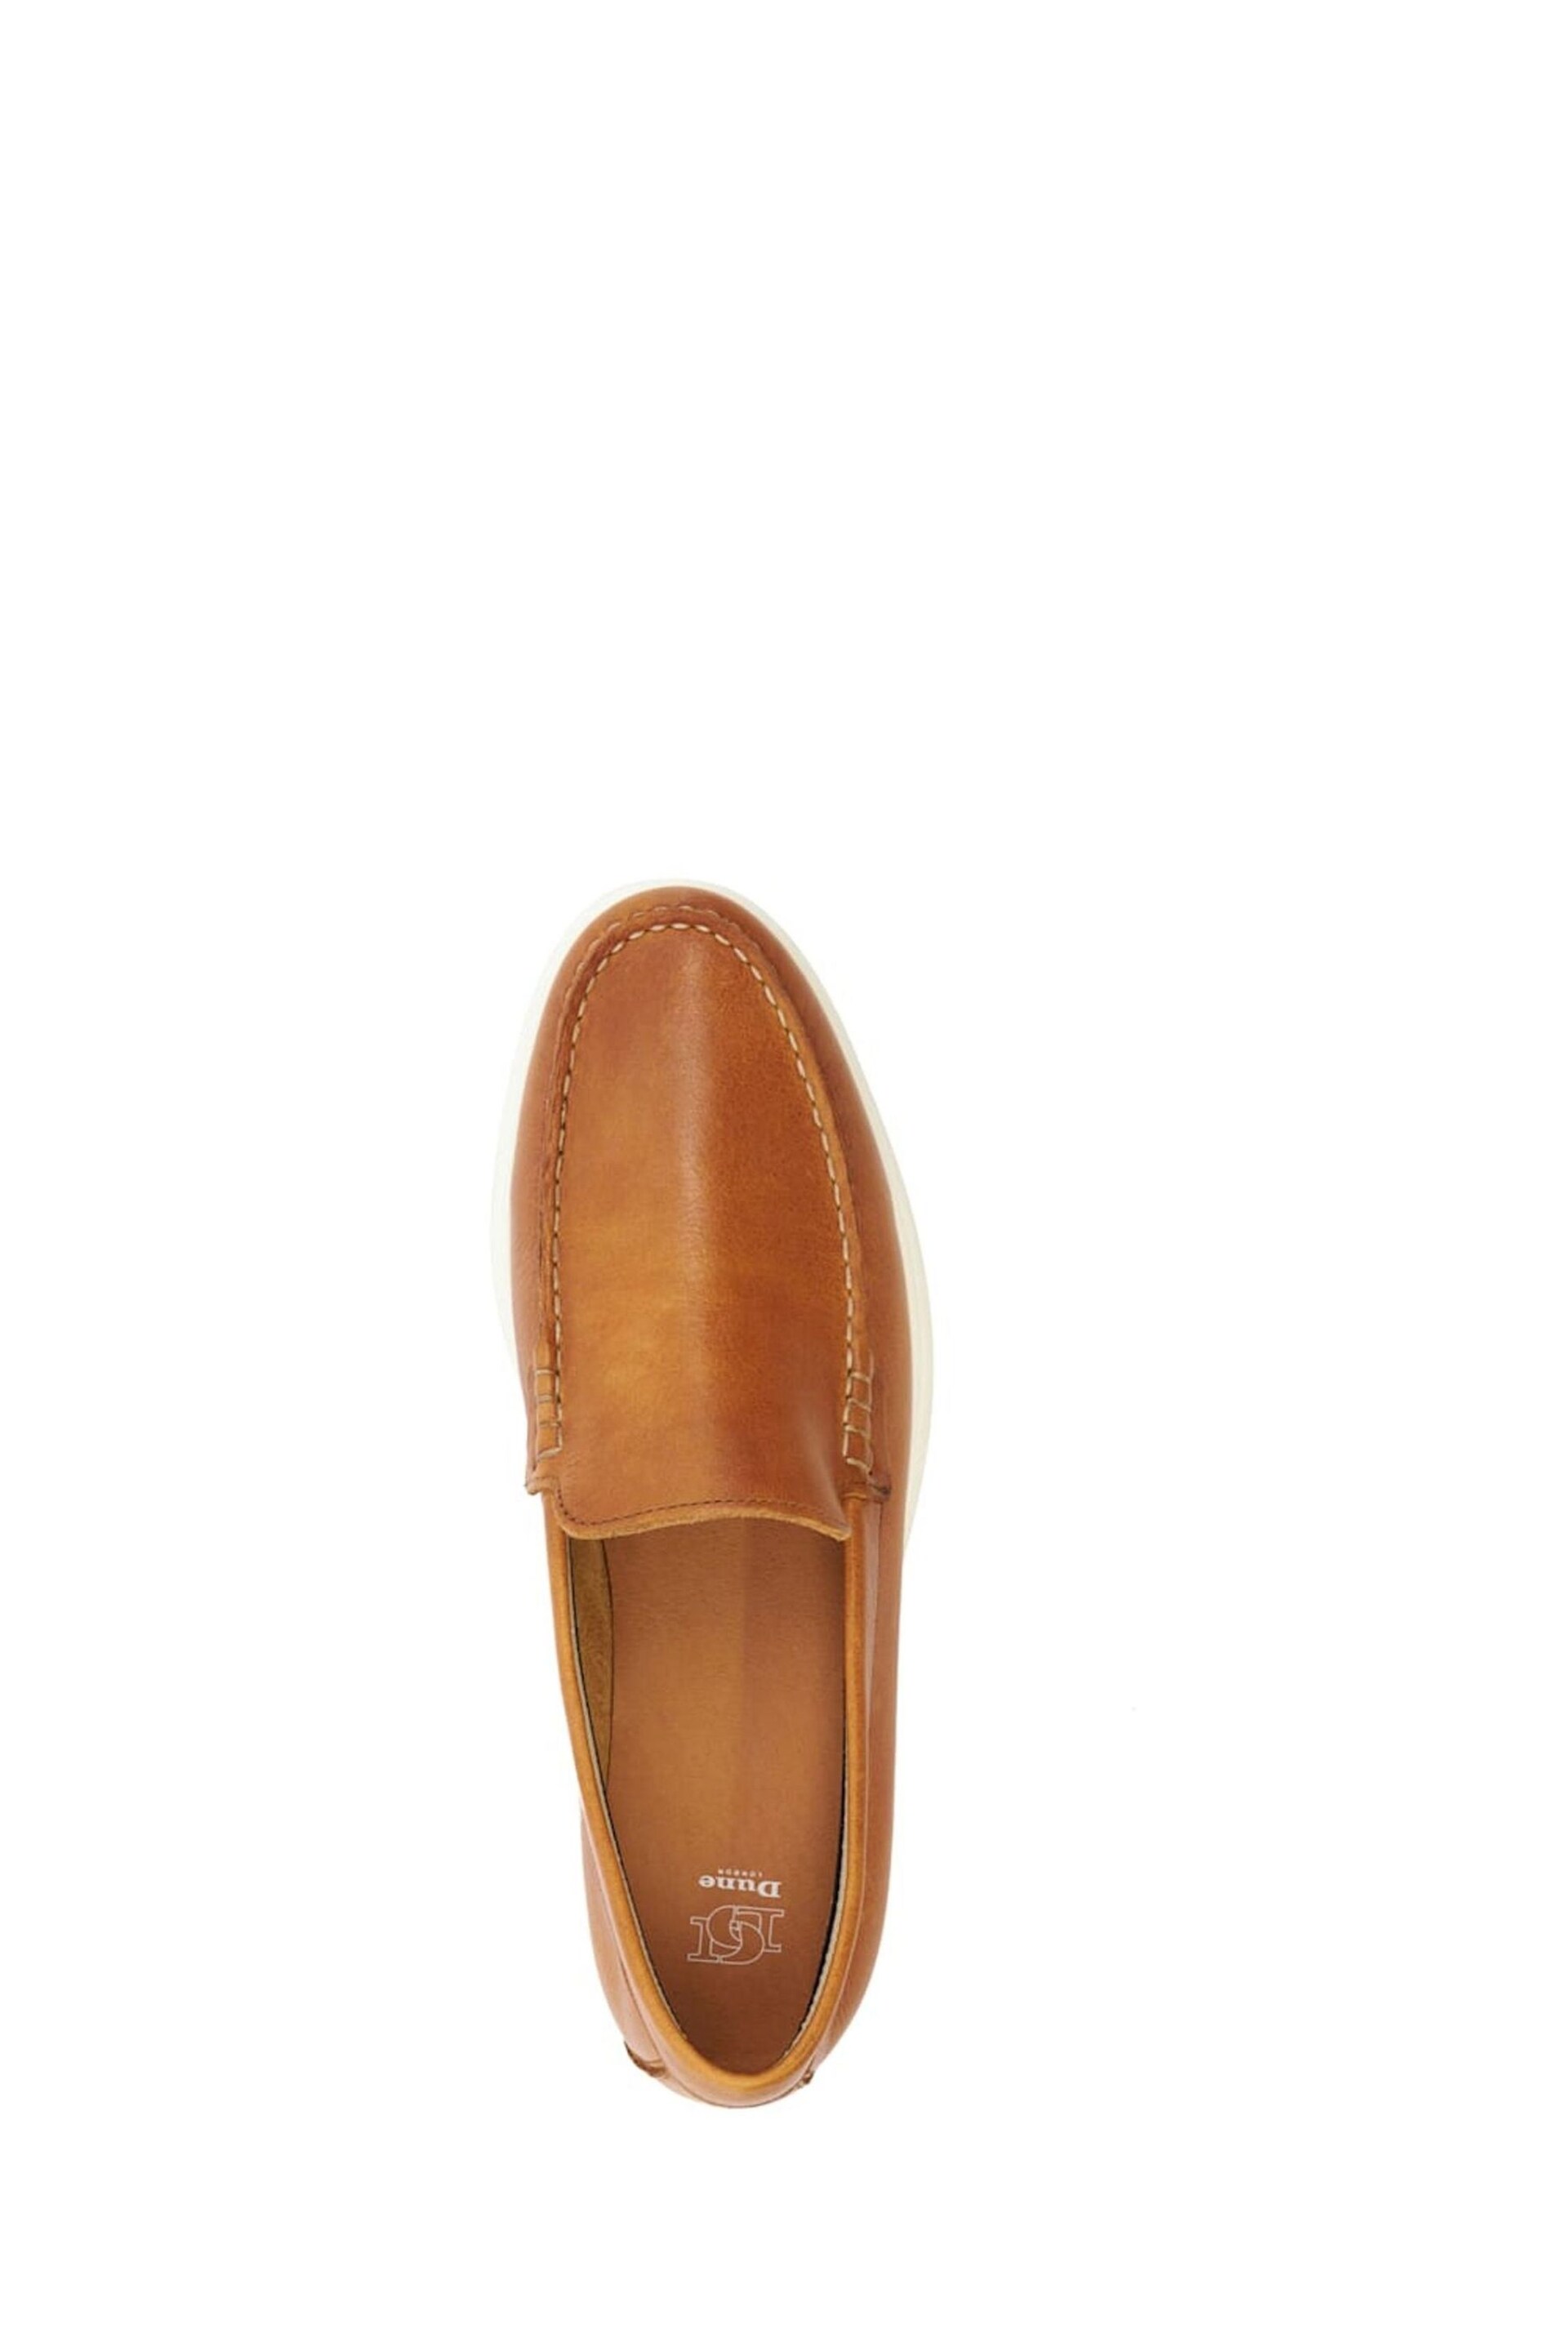 Dune London Brown Buftonn Sole Loafers - Image 6 of 6